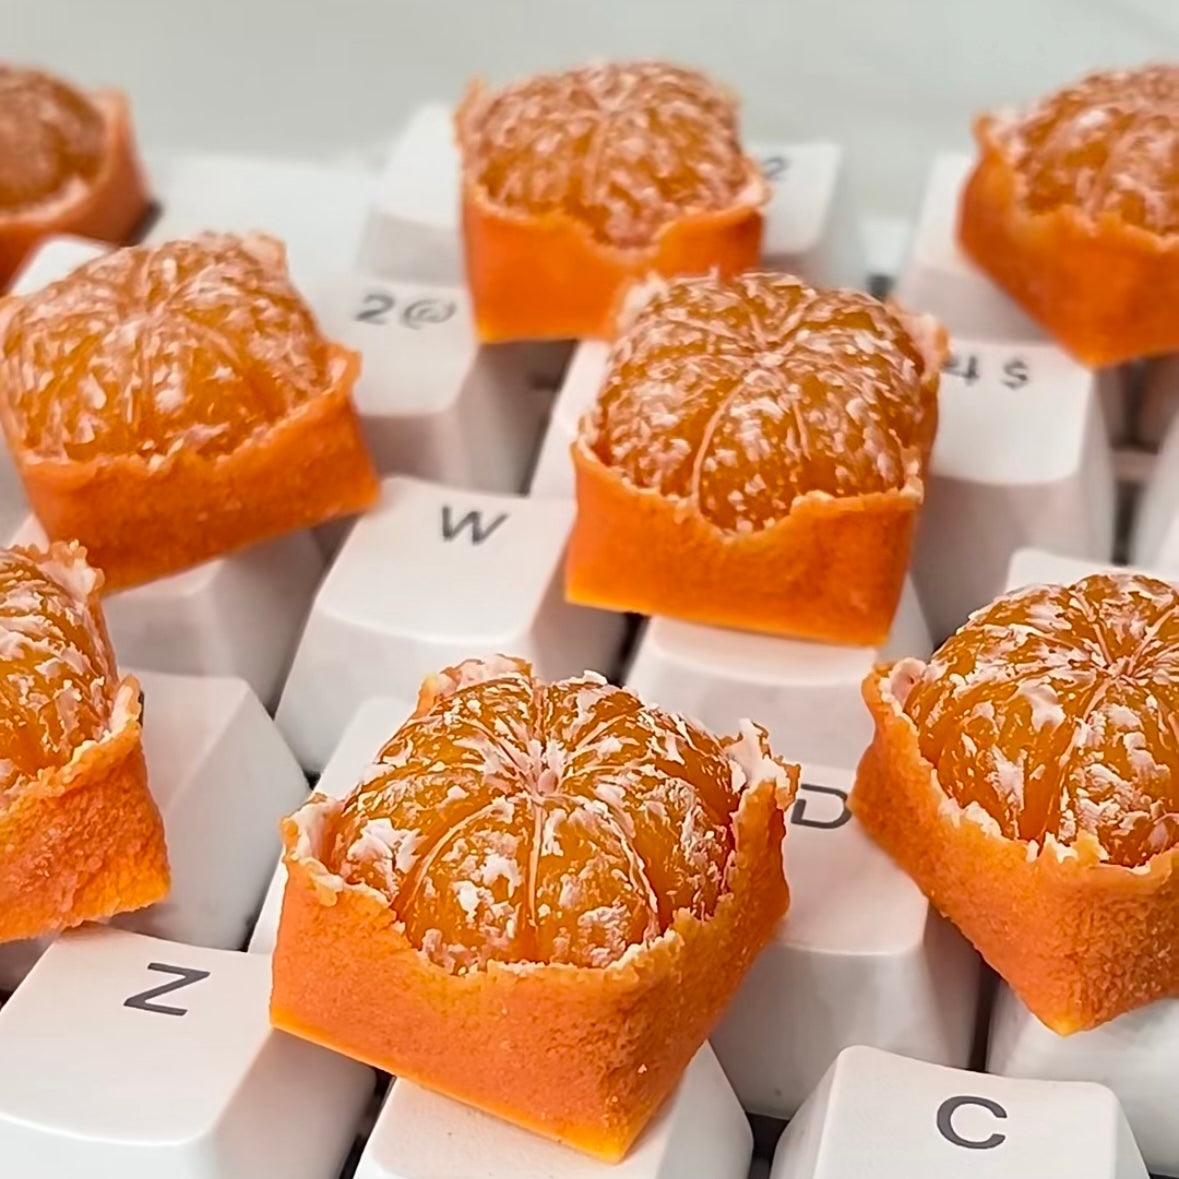 A square Orange or Tangerine Artisan keycap Custom keycaps The simulated orange keycaps are like a real little orange on your keycaps, it's like I can smell the orange through the computer screen.